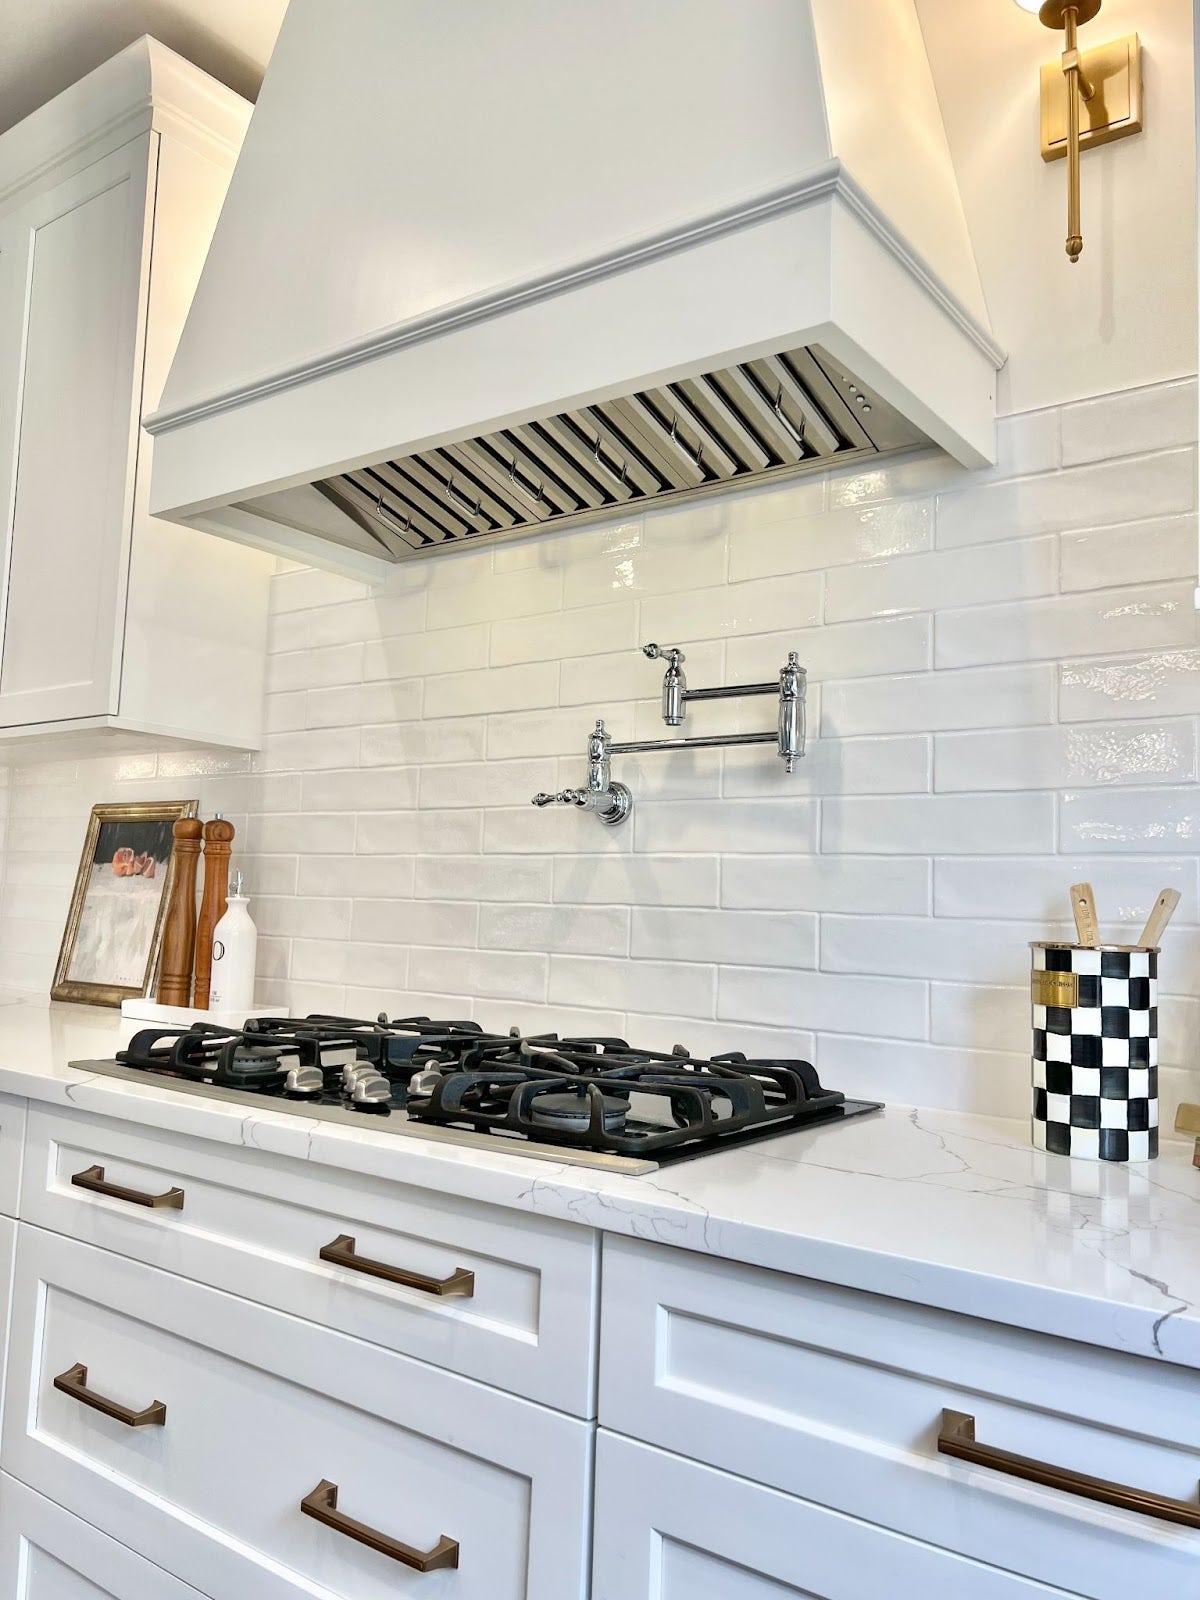 Close-up of a white kitchen countertop with a stainless steel stovetop oven. - Proline Range Hoods - prolinerangehoods.com 